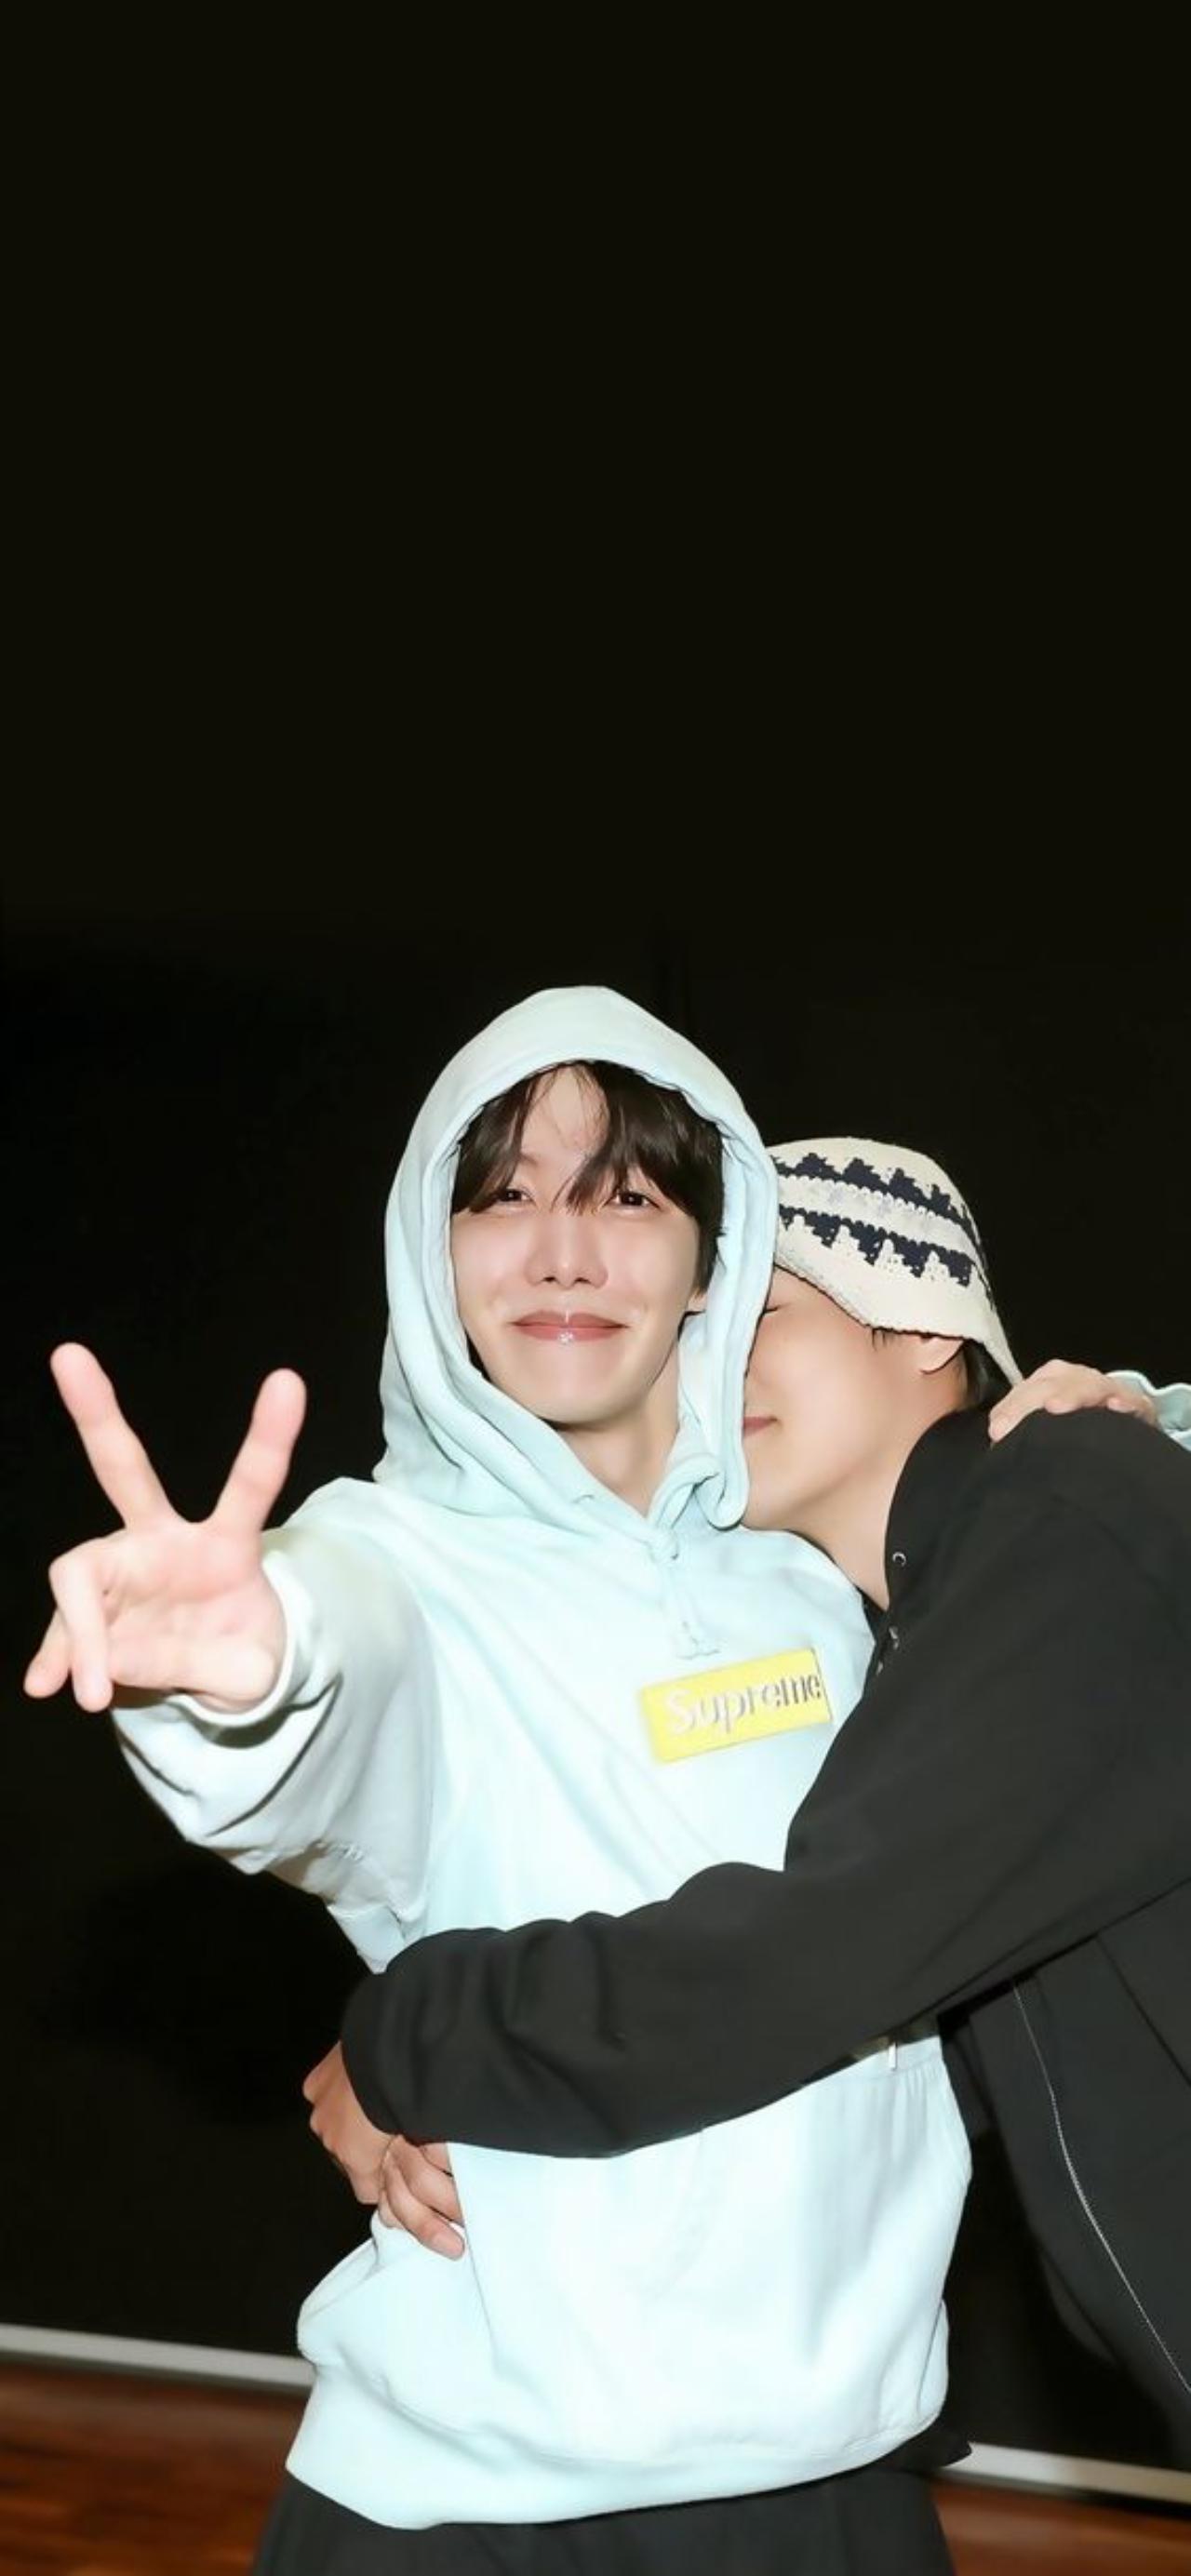 V and J-Hope also share a very cute relationship. The two are perhaps the two 'sunshine' members of the group - and J-Hope is often the only one in the hyung line who plays along and indulges Tae when he is in his cute, puppy mode